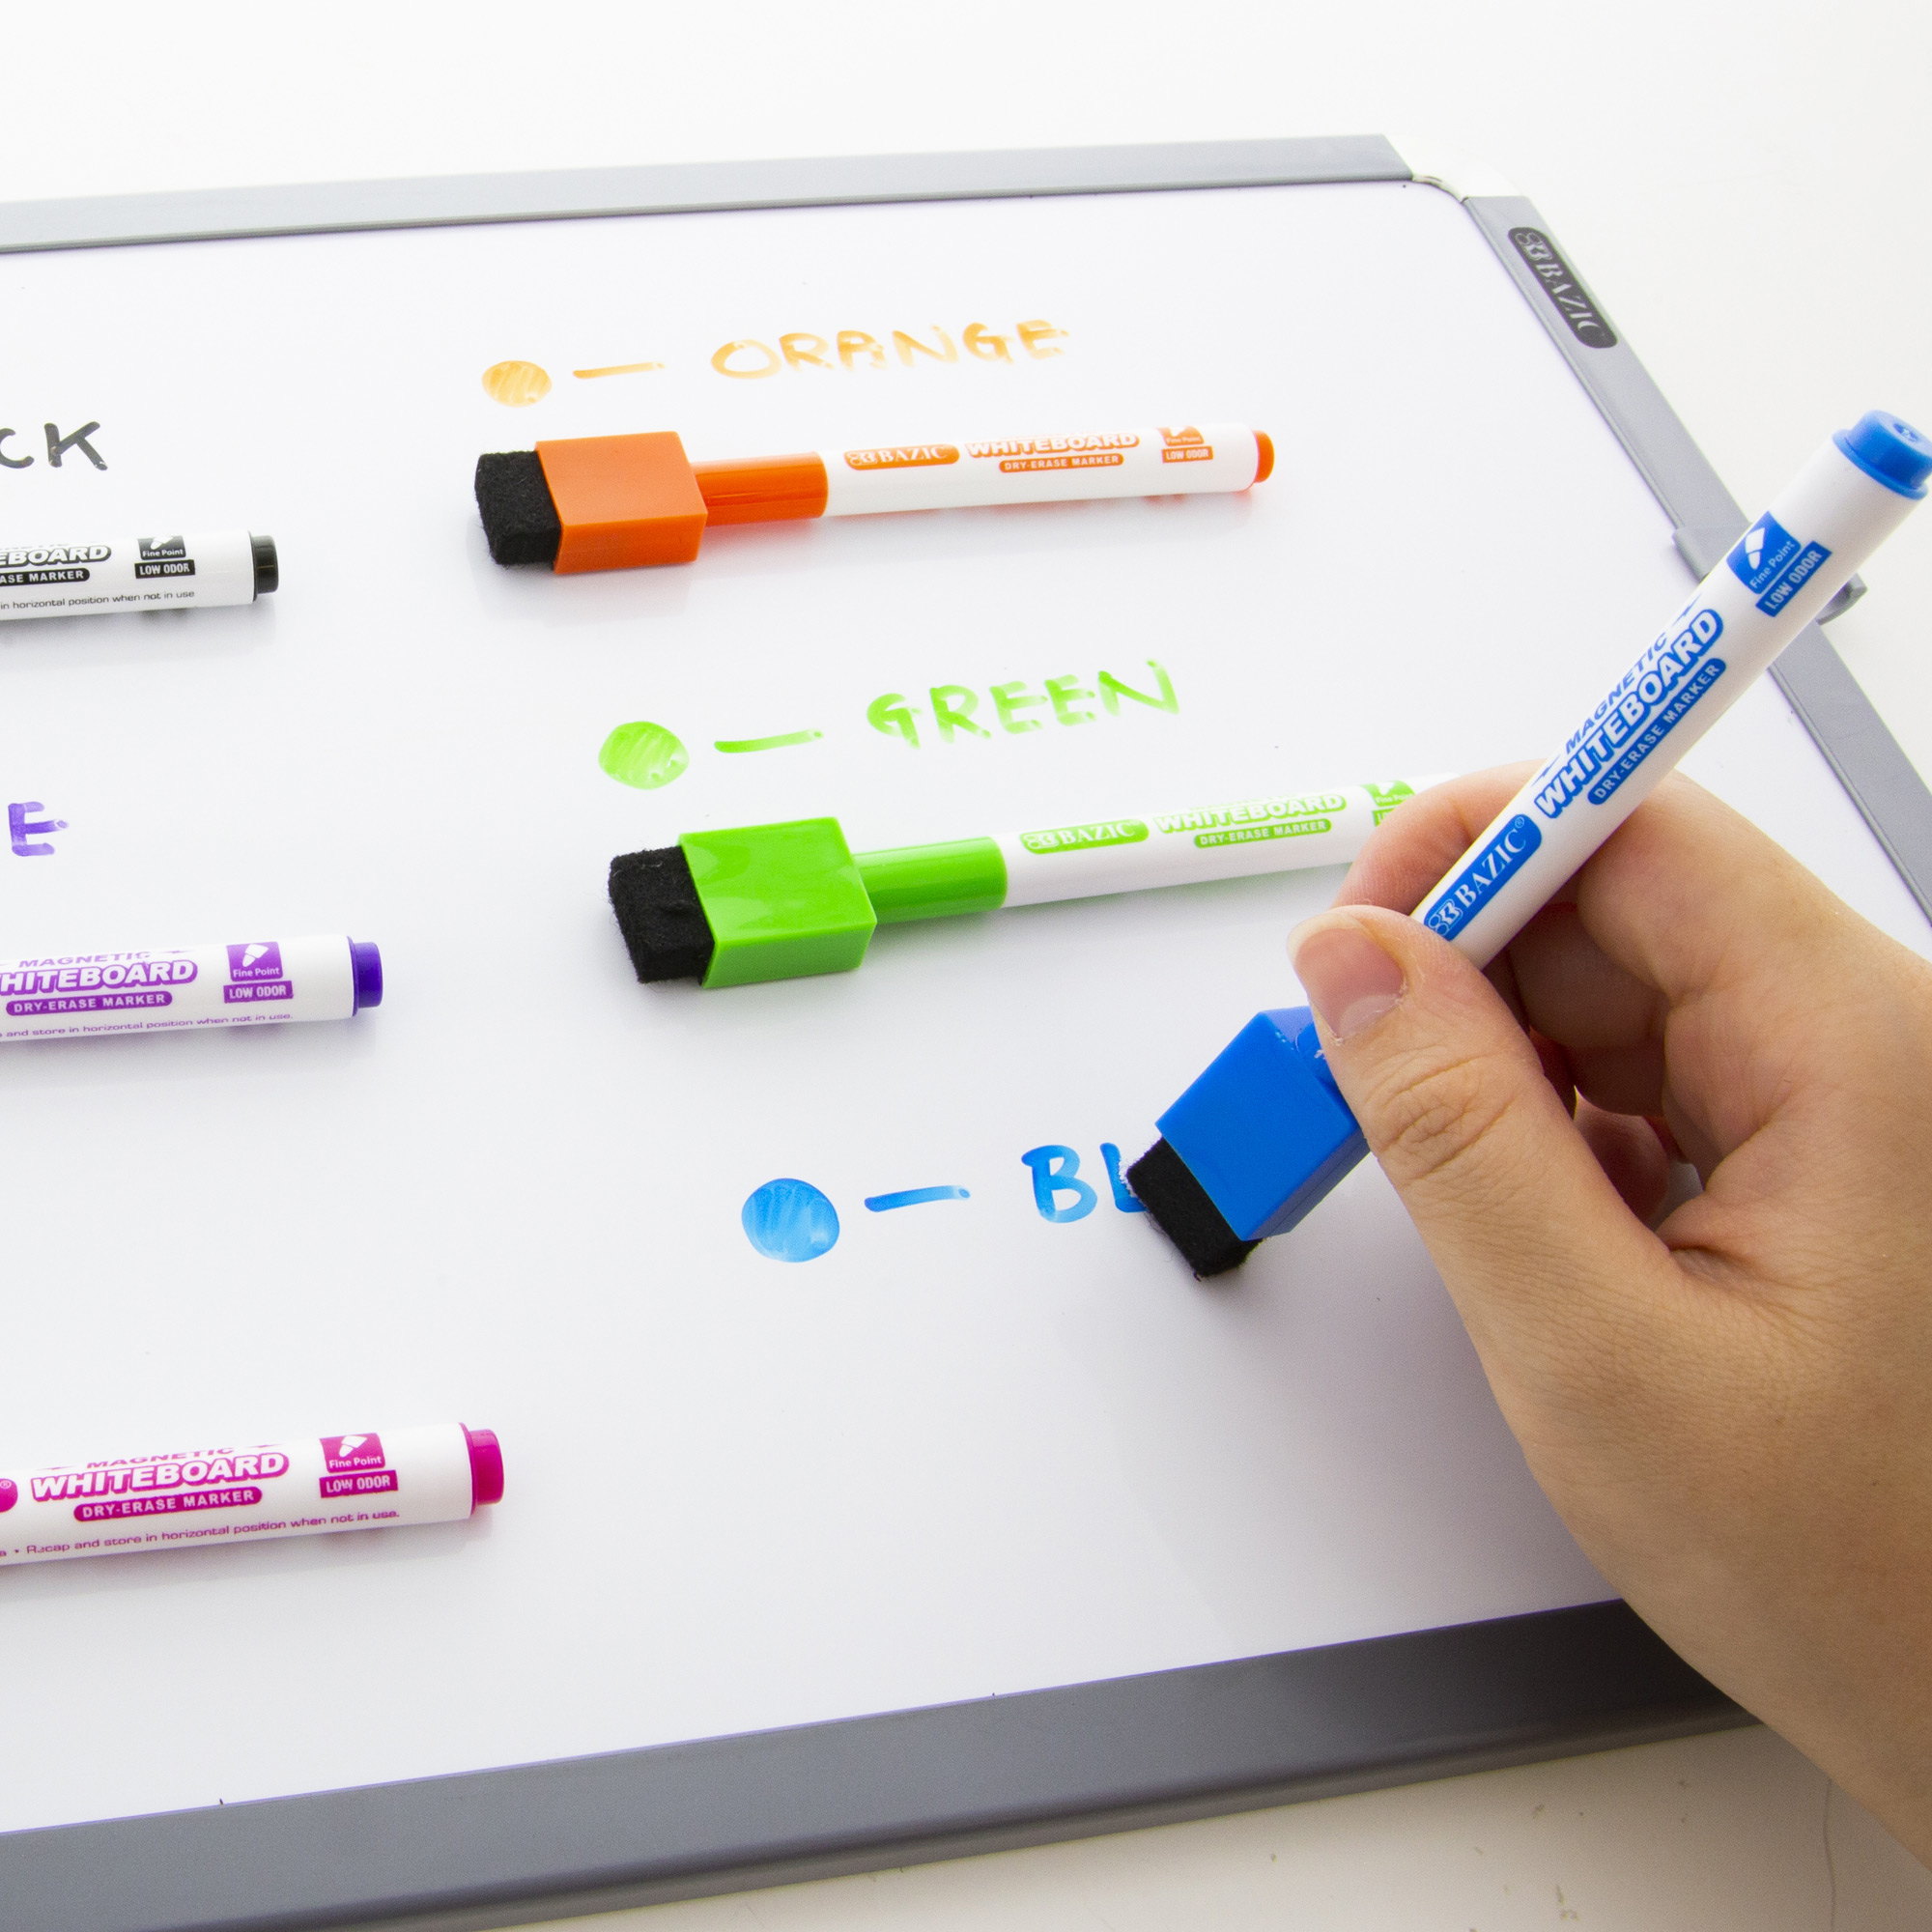 Double-Ended Dry Erase Magnetic Markers 6/Pkg-Assorted